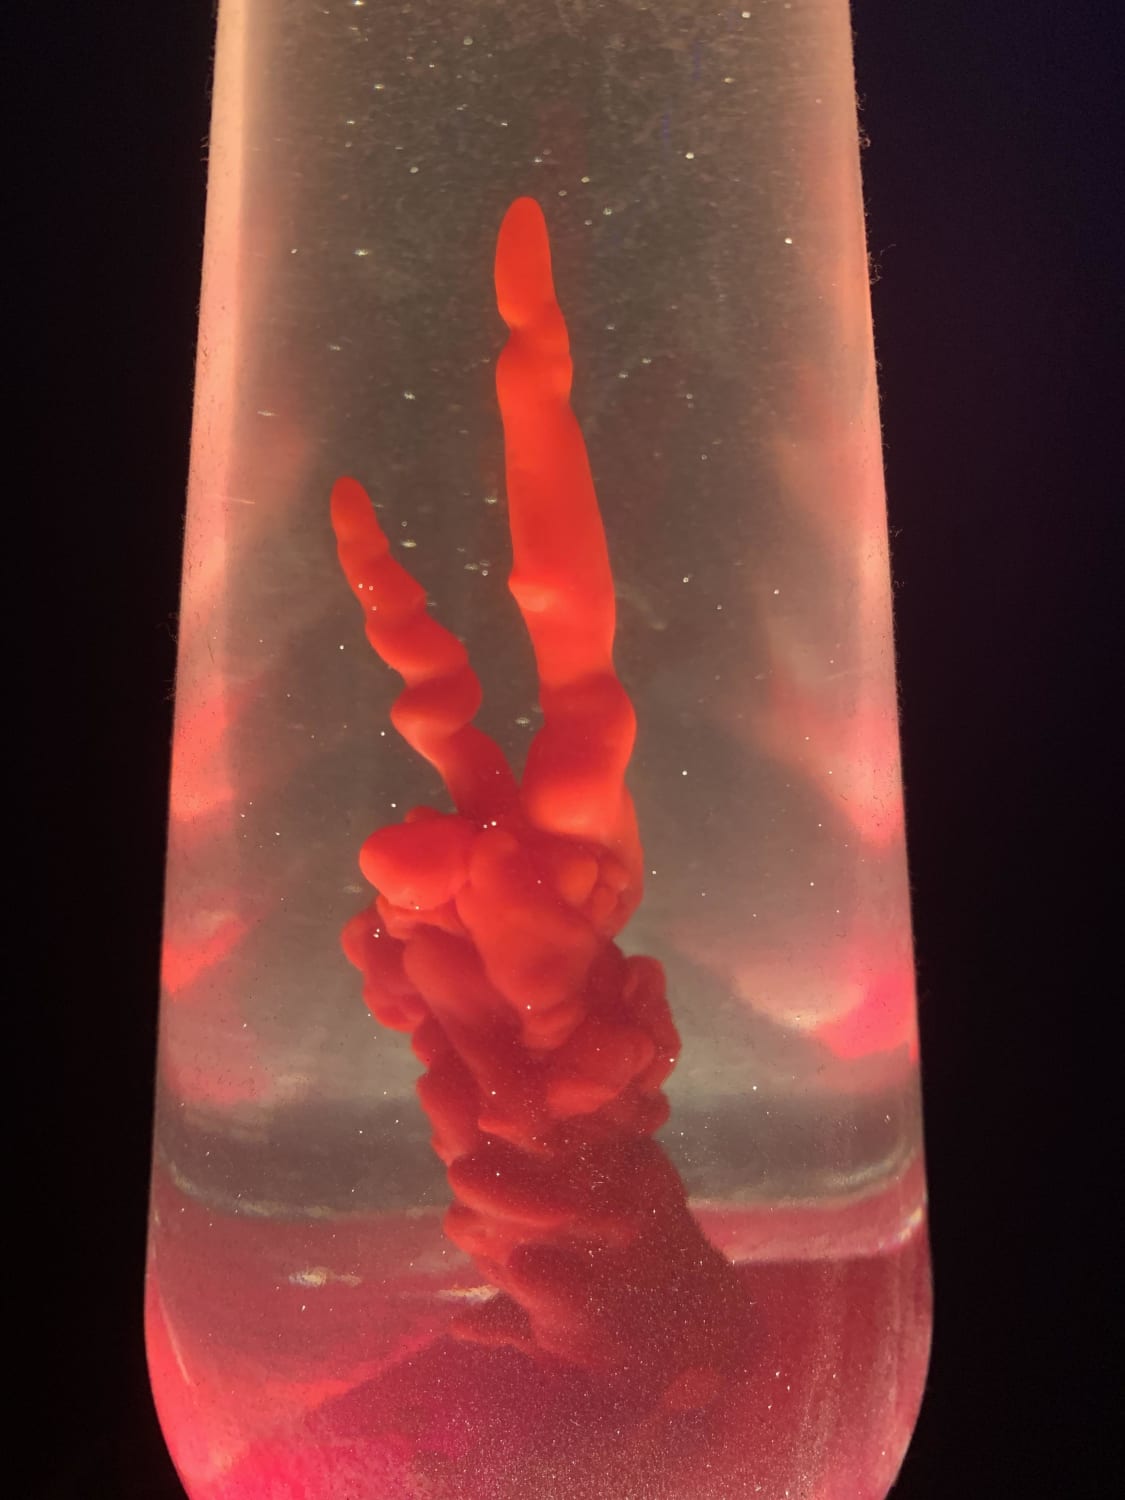 My lava lamp either wants peace on earth or to summon the devil [bad vibes maybe]